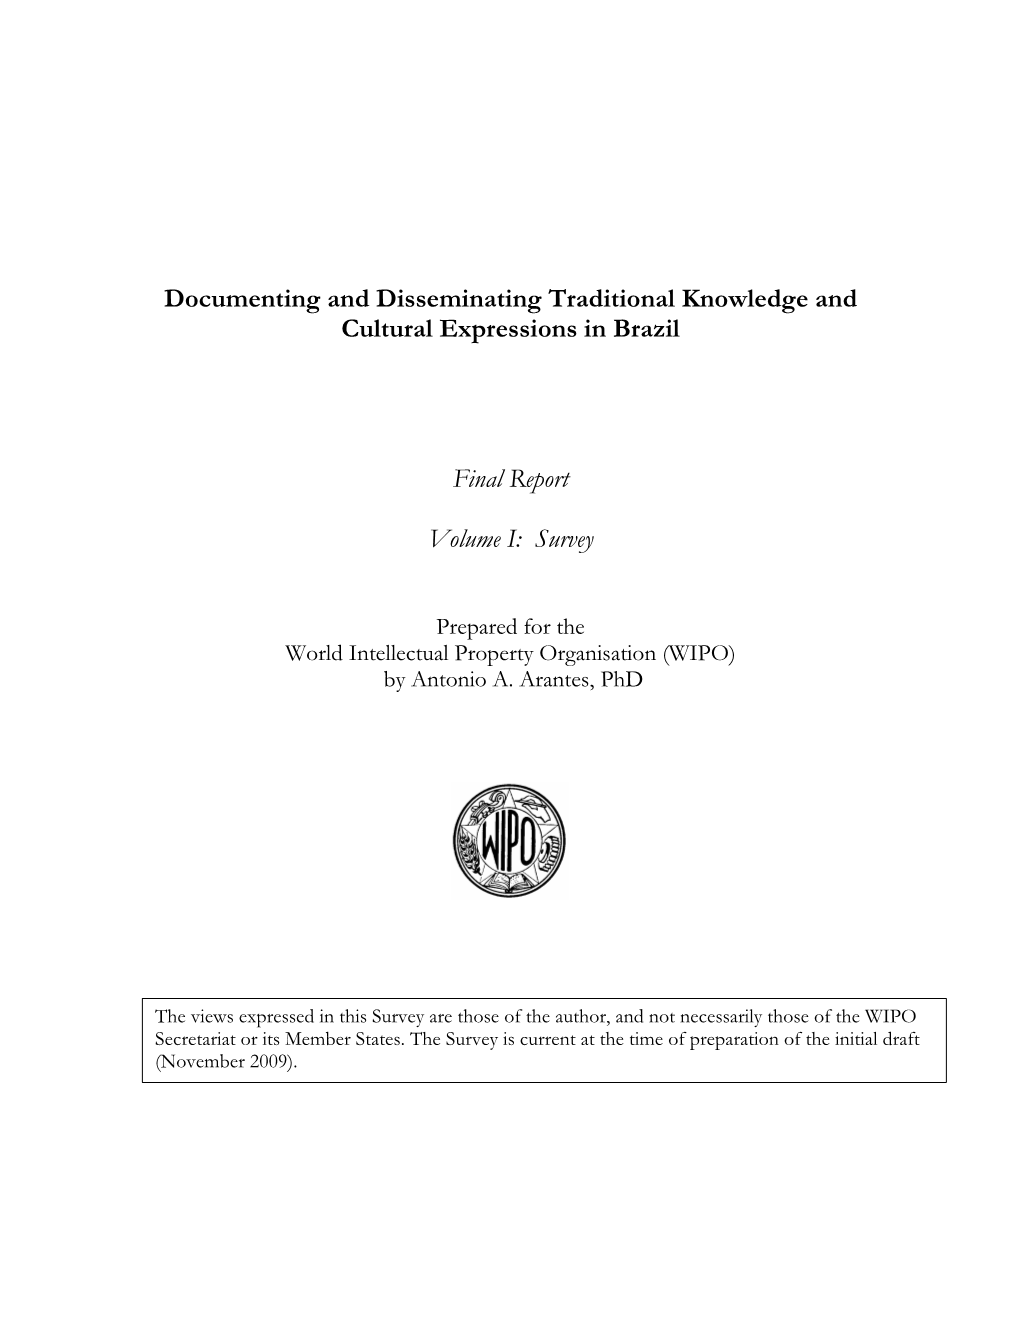 Documenting and Disseminating Traditional Knowledge and Cultural Expressions in Brazil